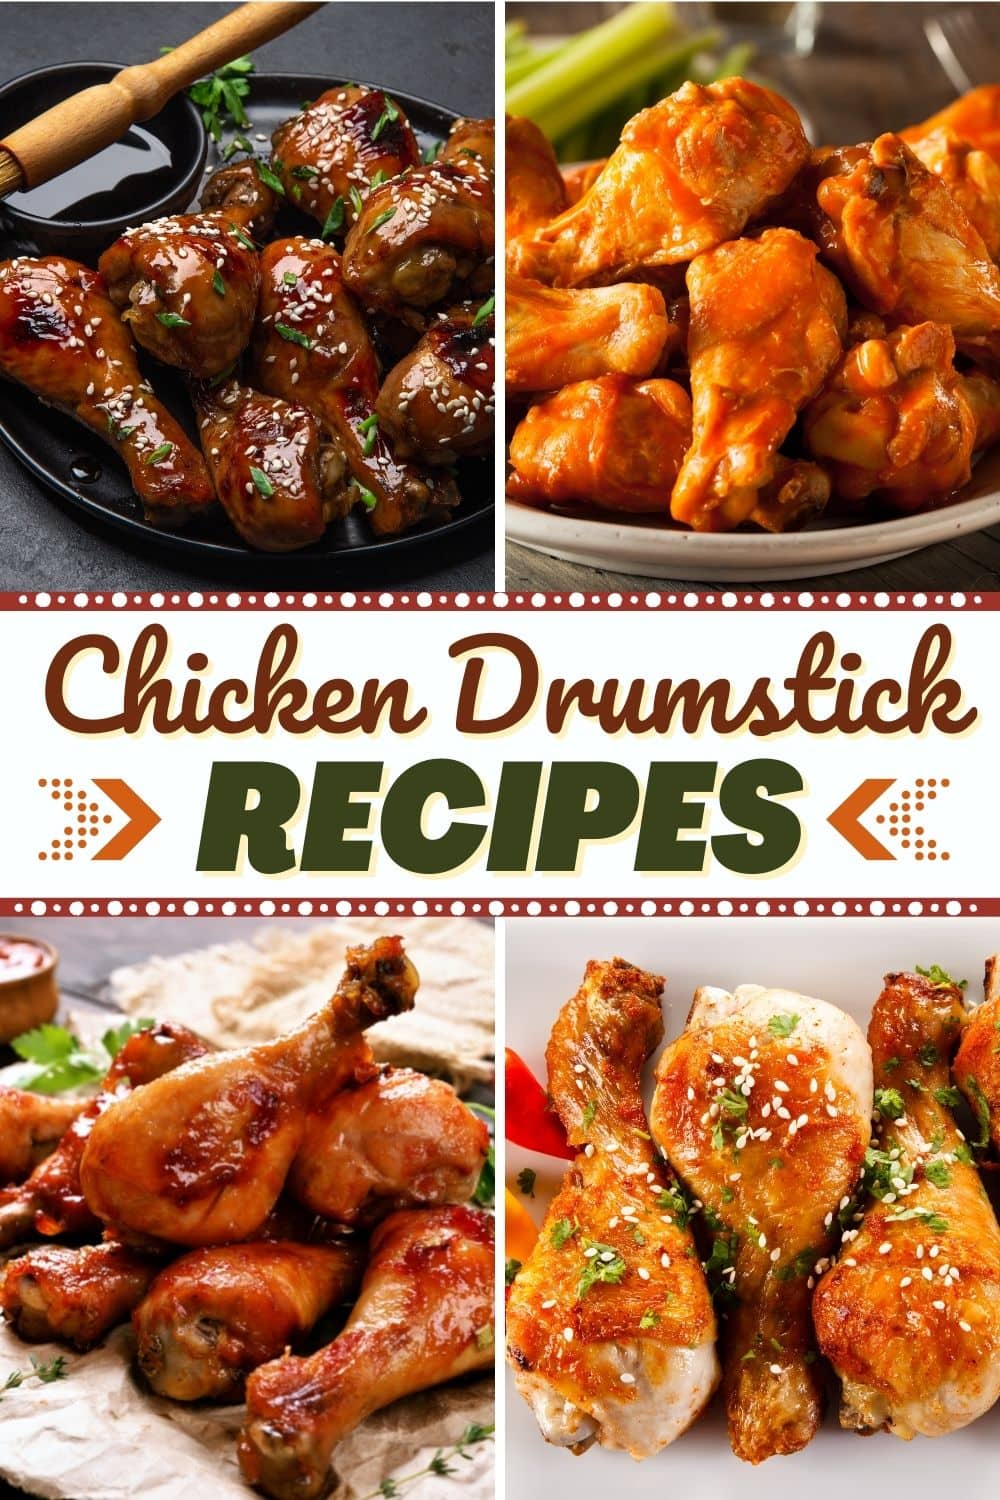 20 Easy Chicken Drumstick Recipes Guaranteed to Satisfy - Insanely Good